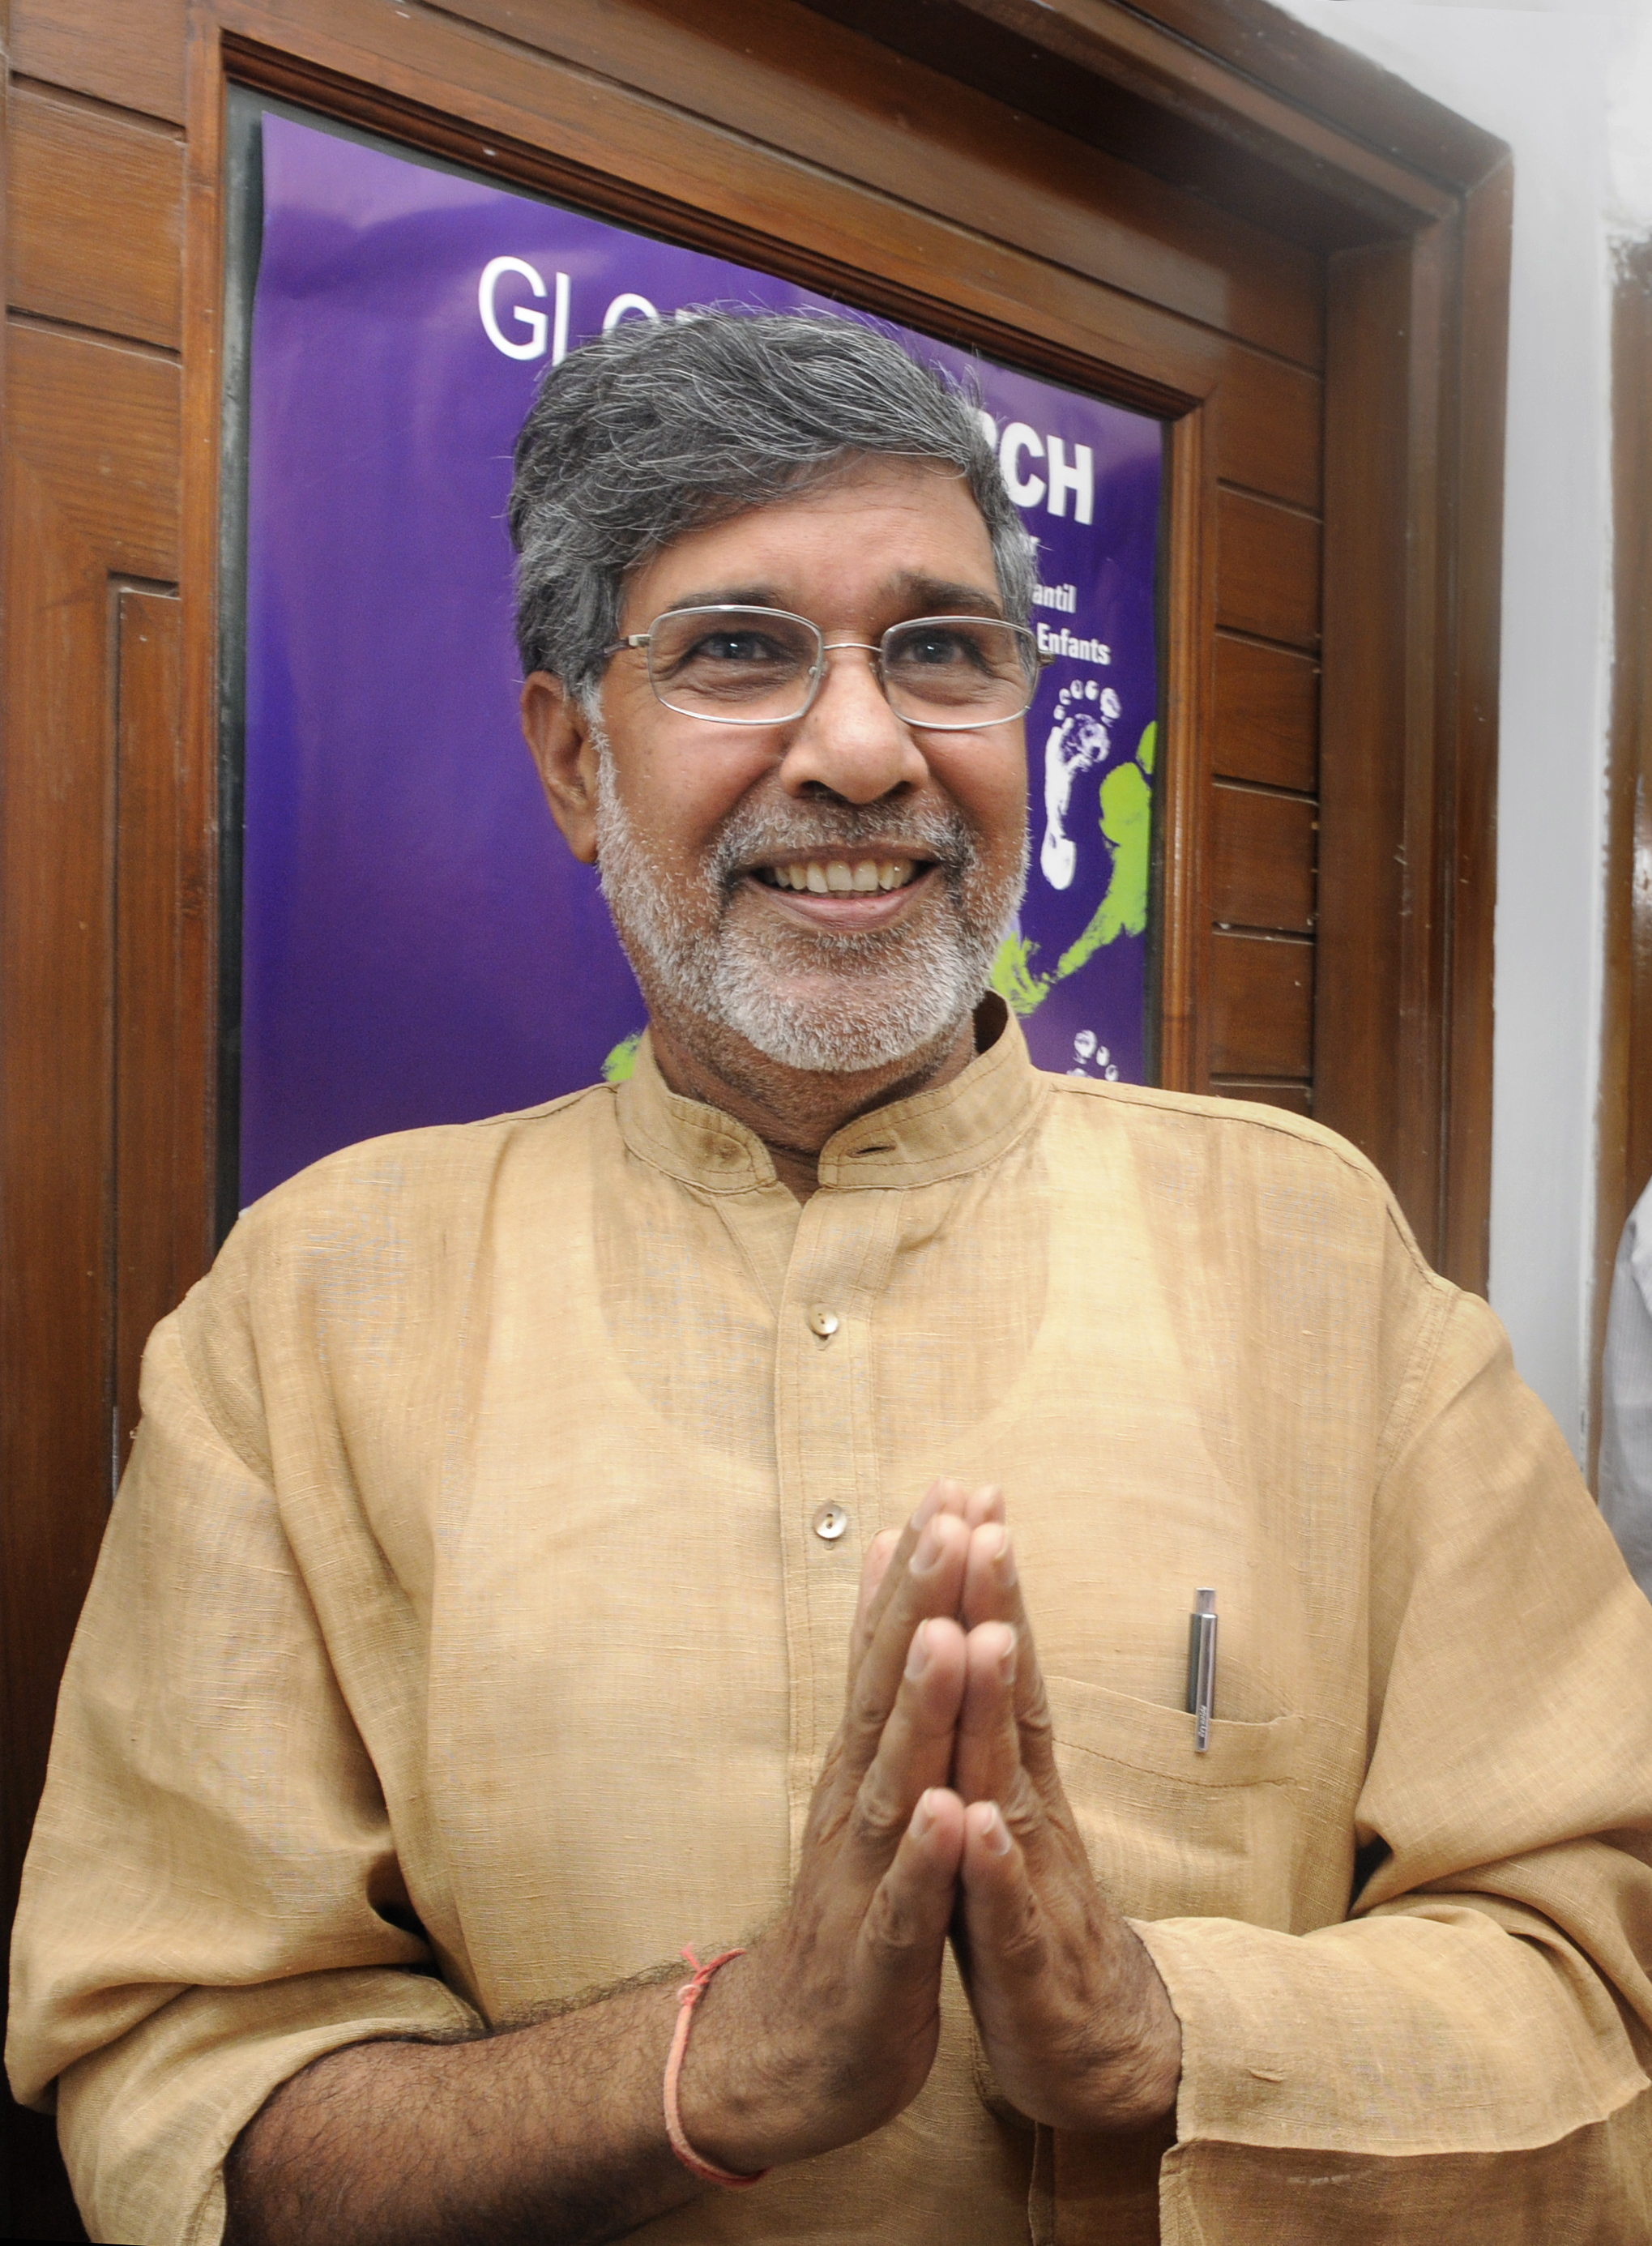 Indian childrens right activist and 2014 Nobel peace prize laureate Kailash Satyarthi greets media persons and well-wishers at his residence after the announcement of prize on October 10, 2014 in New Delhi, India. (Hindustan Times—Hindustan Times via Getty Images)